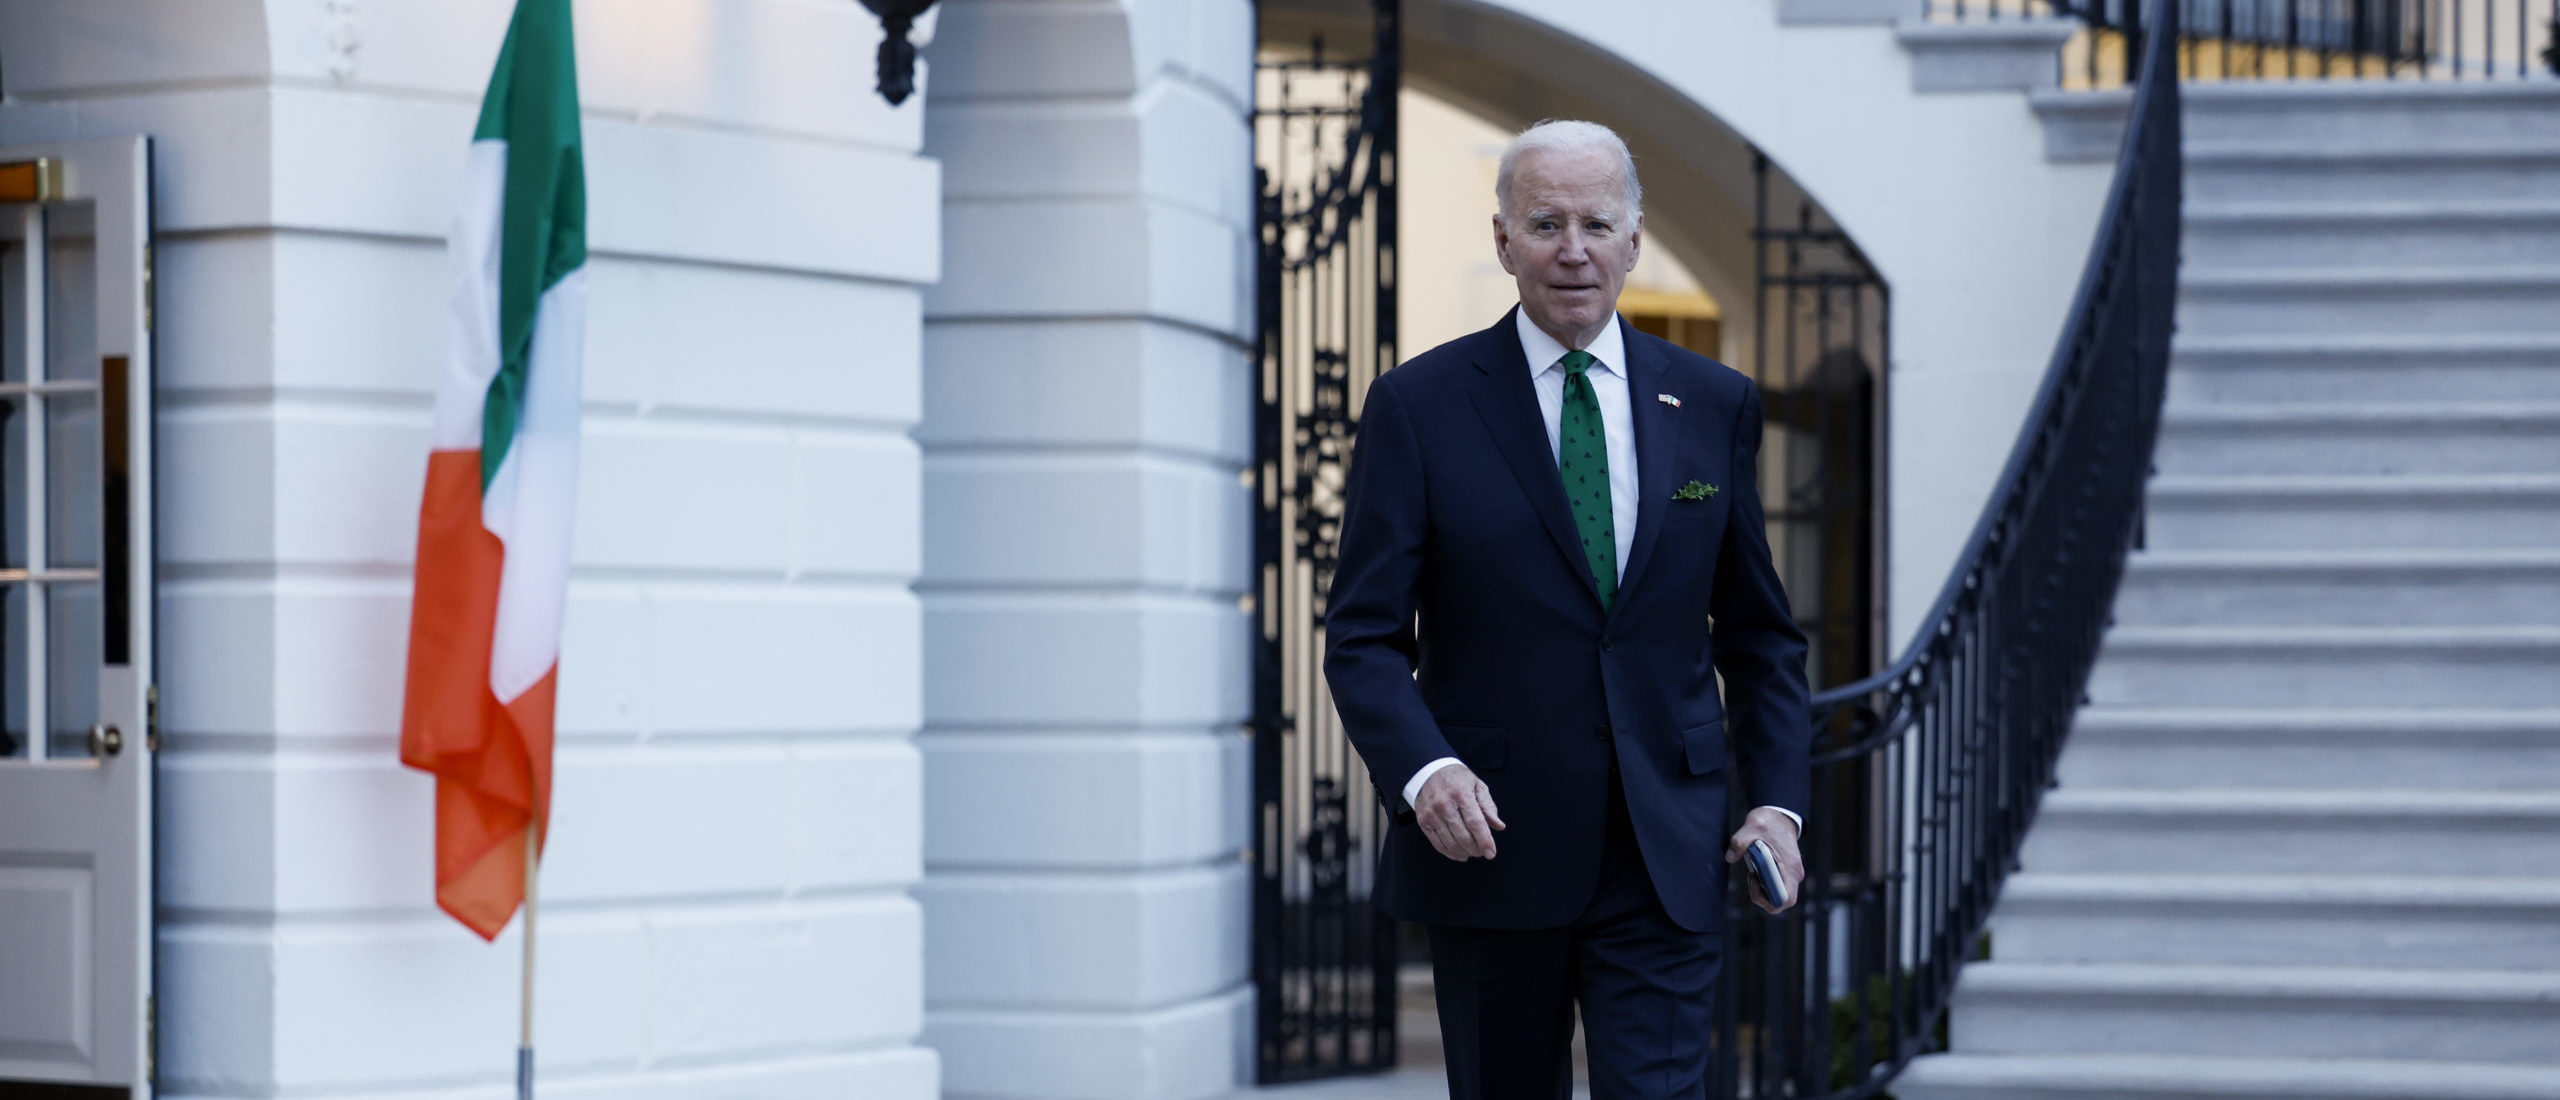 GROVER NORQUIST: Biden's Tax Plan Will 'Trickle Down' And Pummel The Middle Class